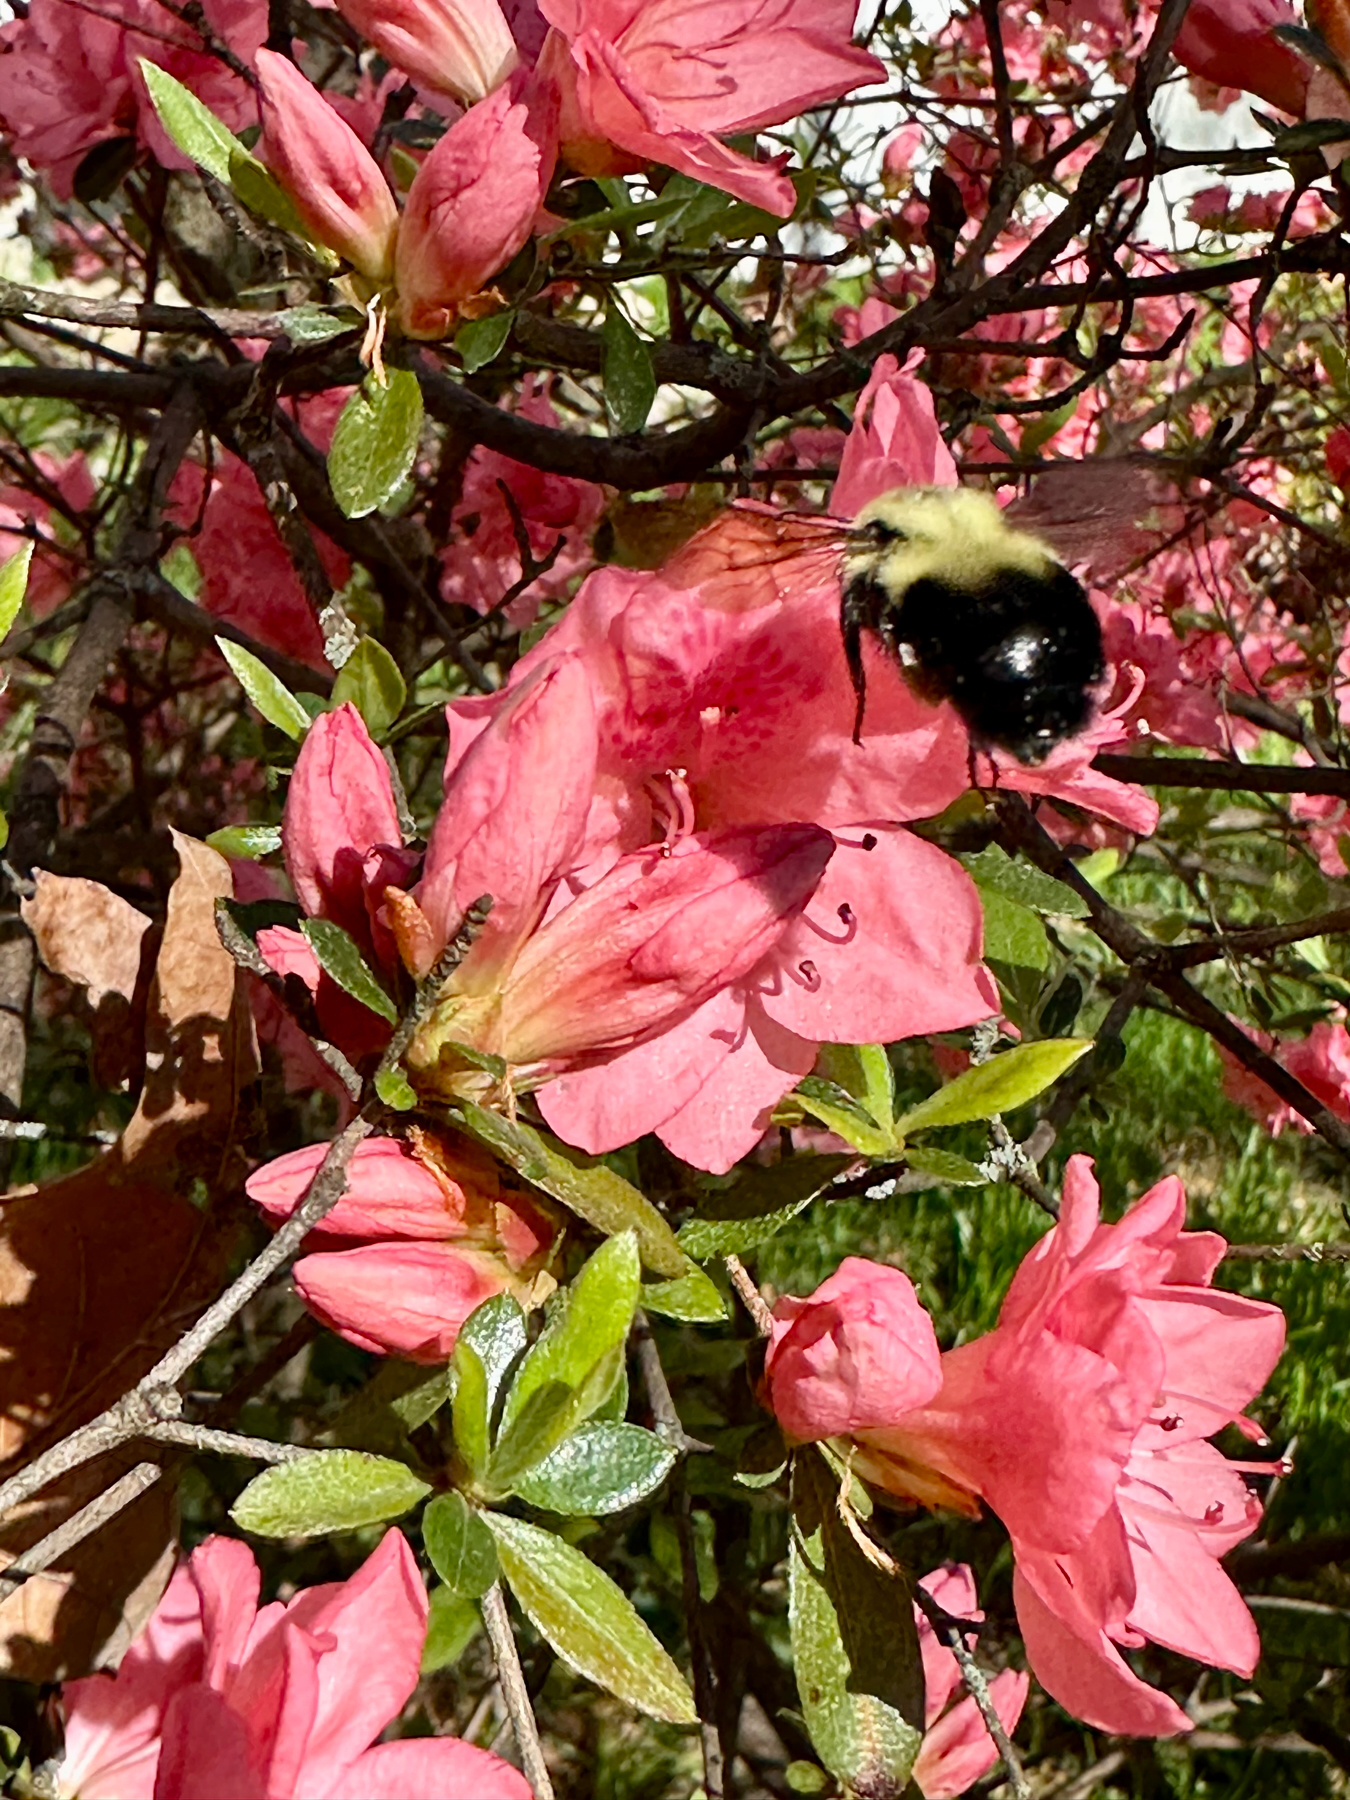 A bumblebee on a bright pink azalea flower with green leaves in the background.